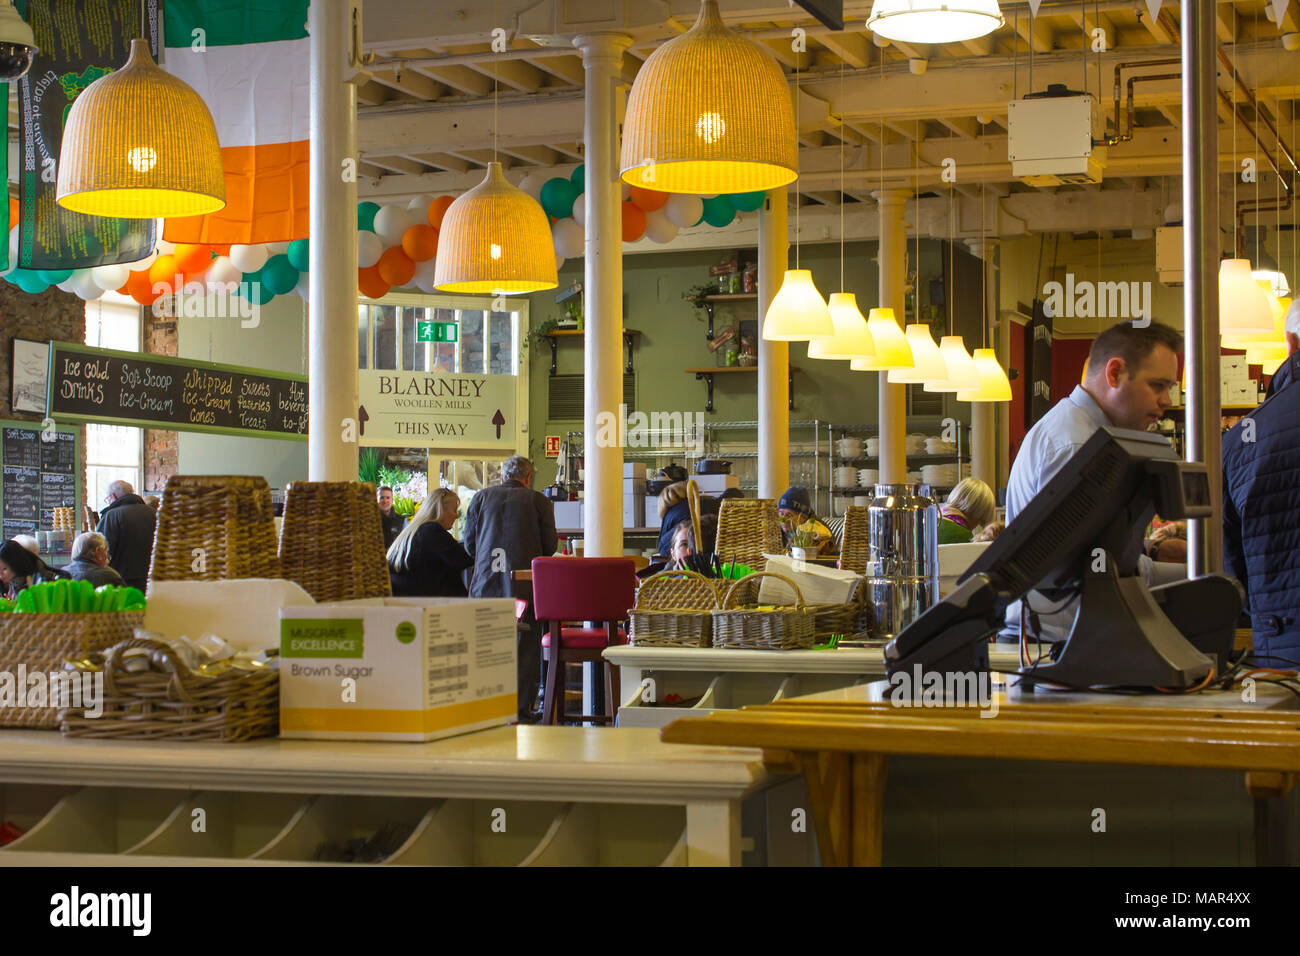 16 March 2018 The warm lit interior of the large restaurant mainly used by tourists to the village of Blarney in County Cork Ireland Stock Photo